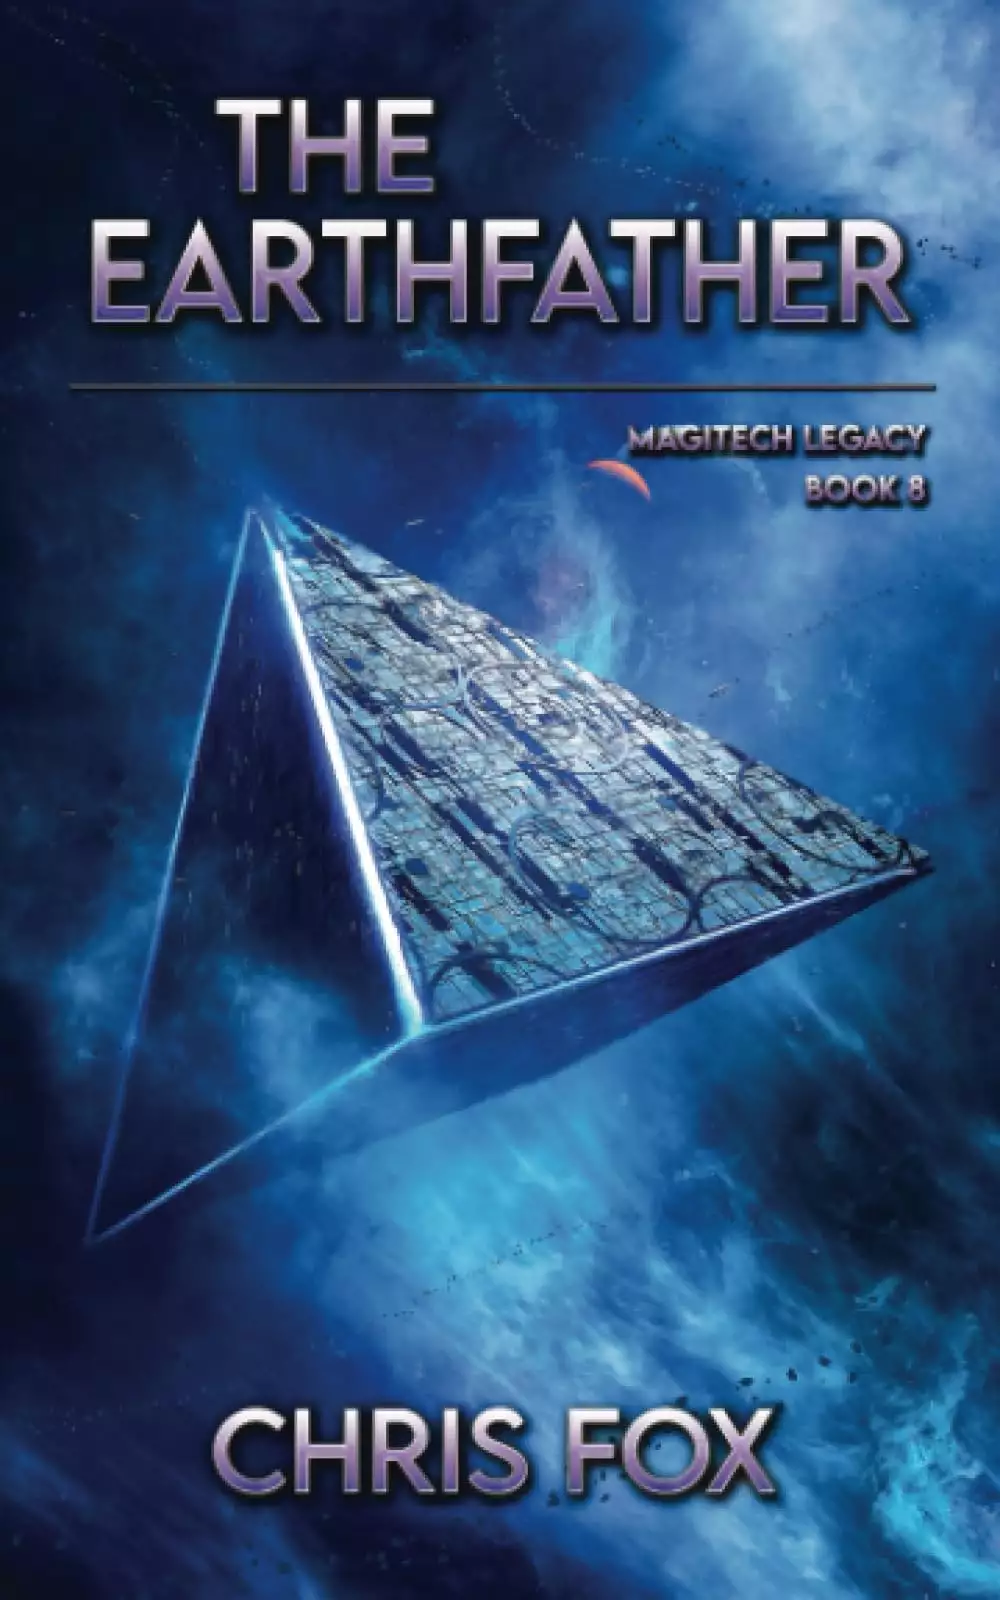 The Earthfather: Magitech Legacy Book 8